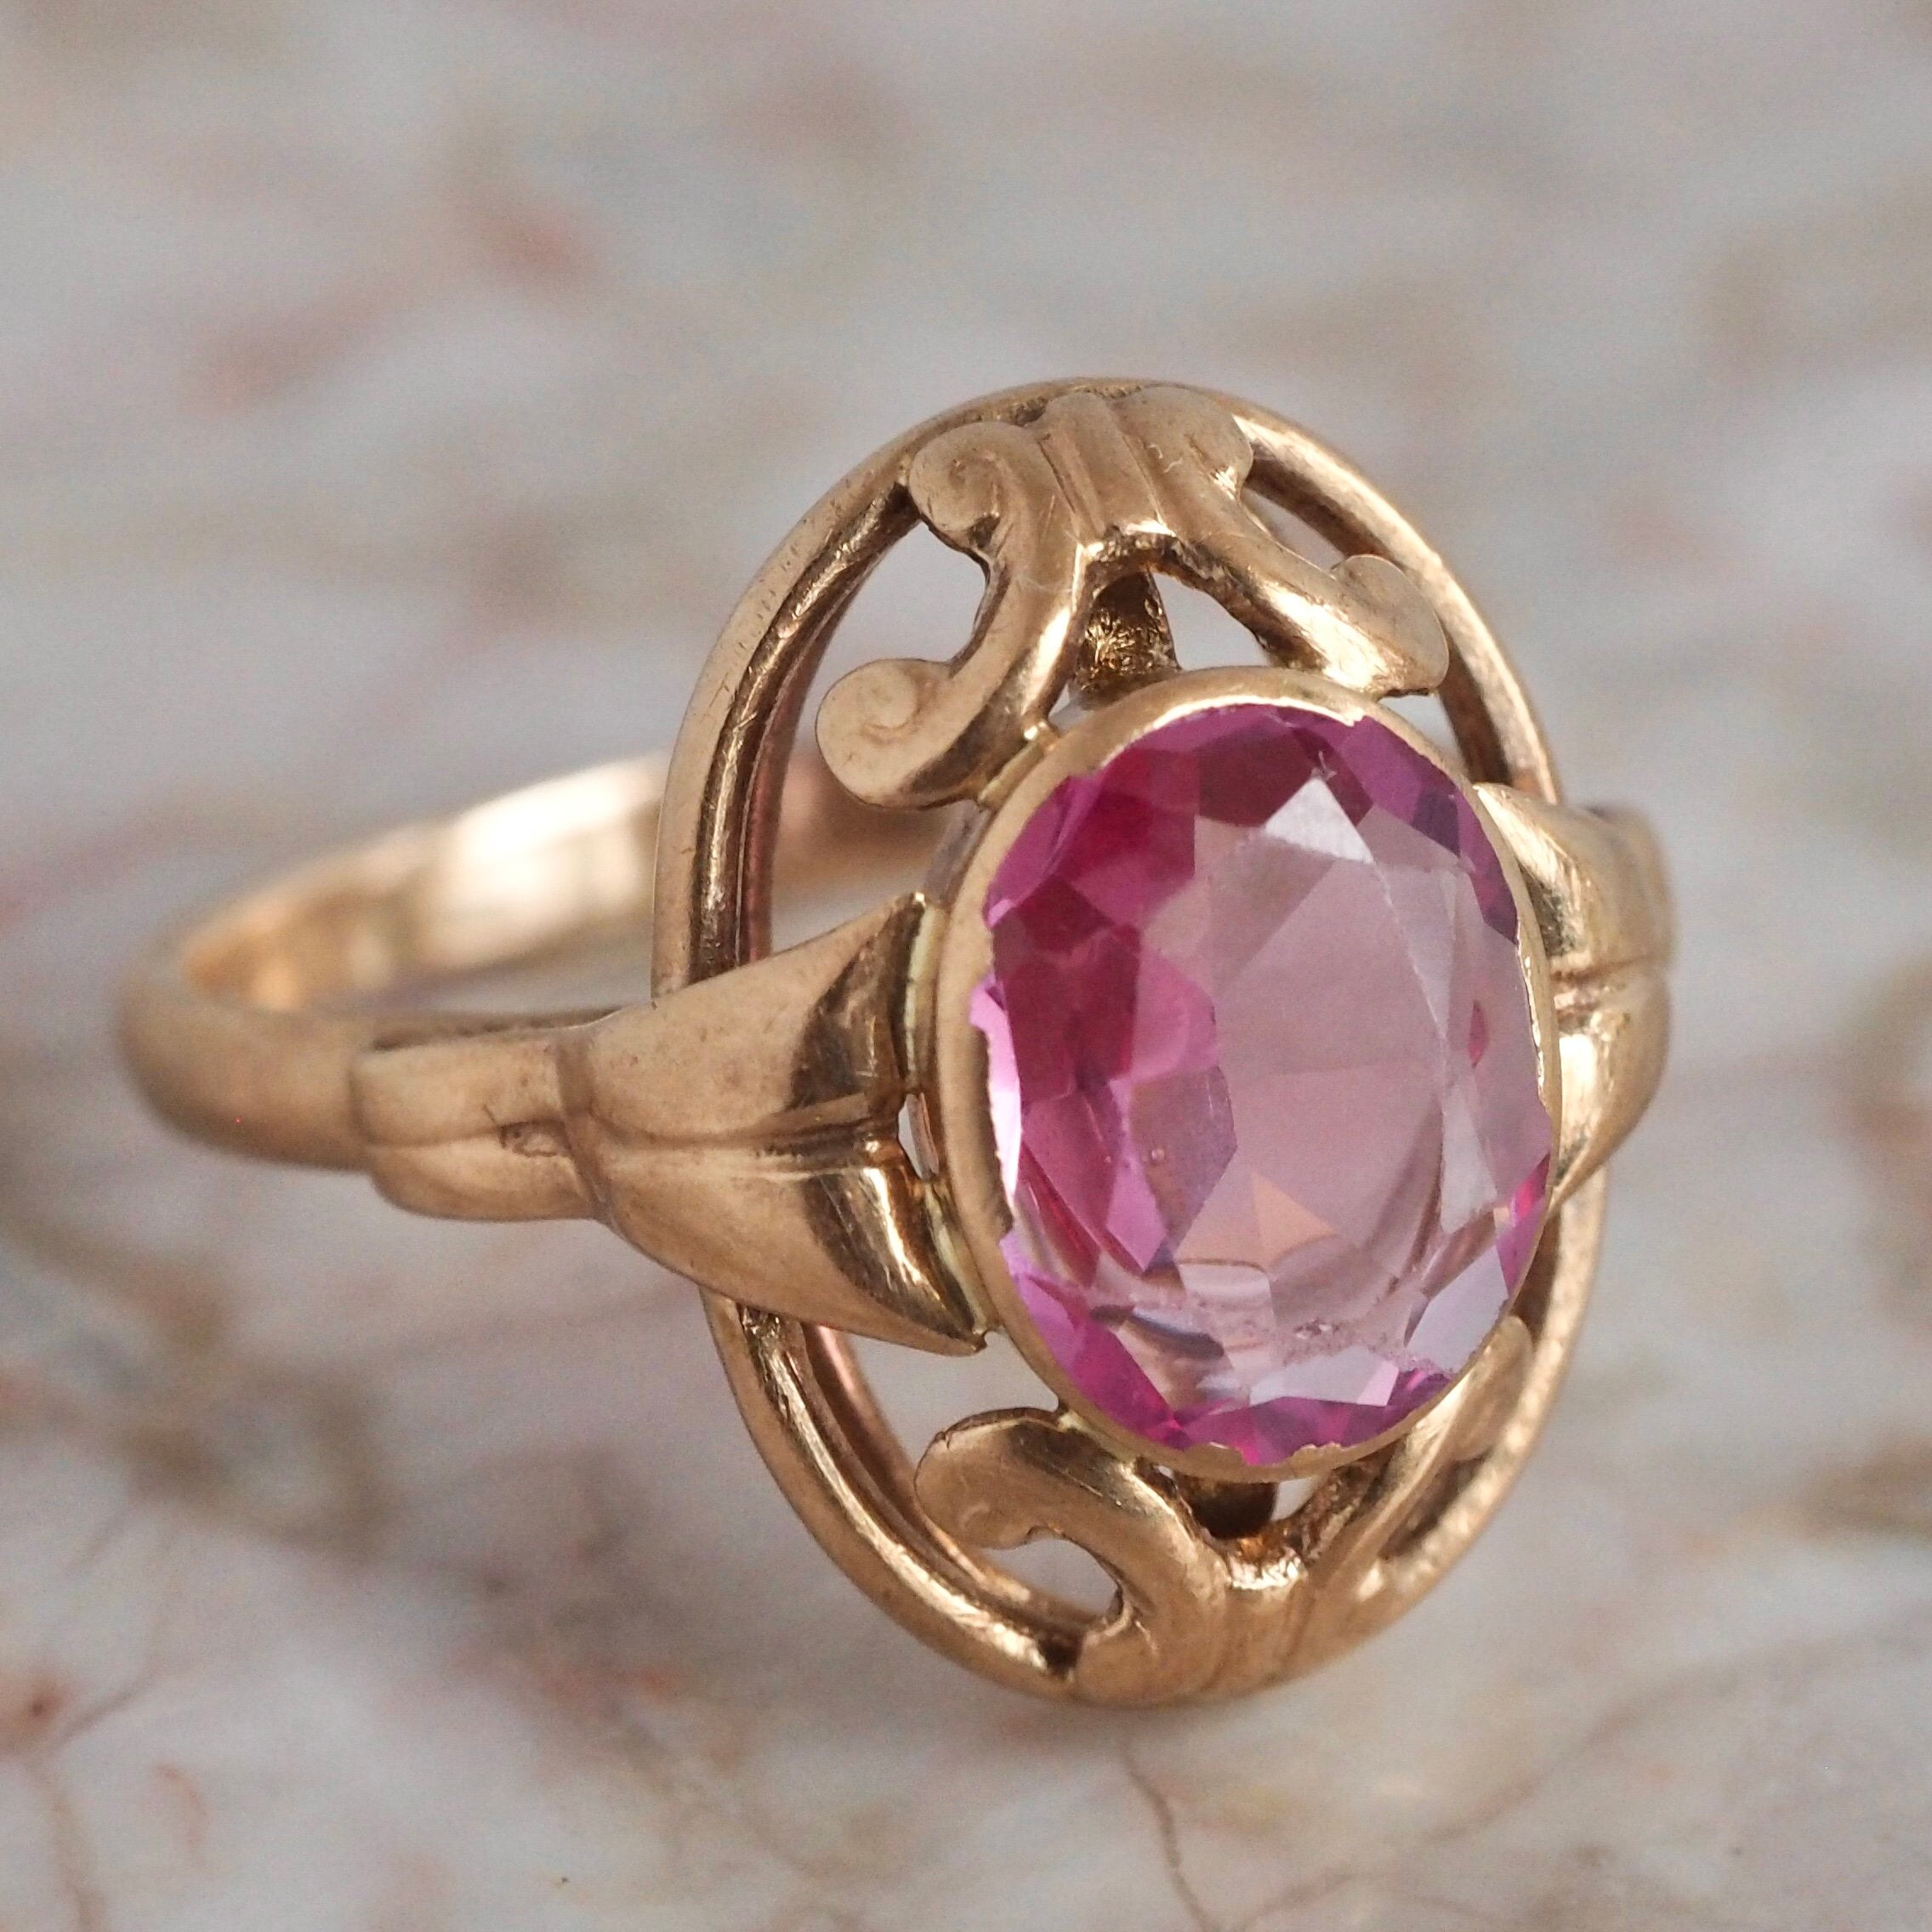 Antique 14k Gold Pink Sapphire Ring